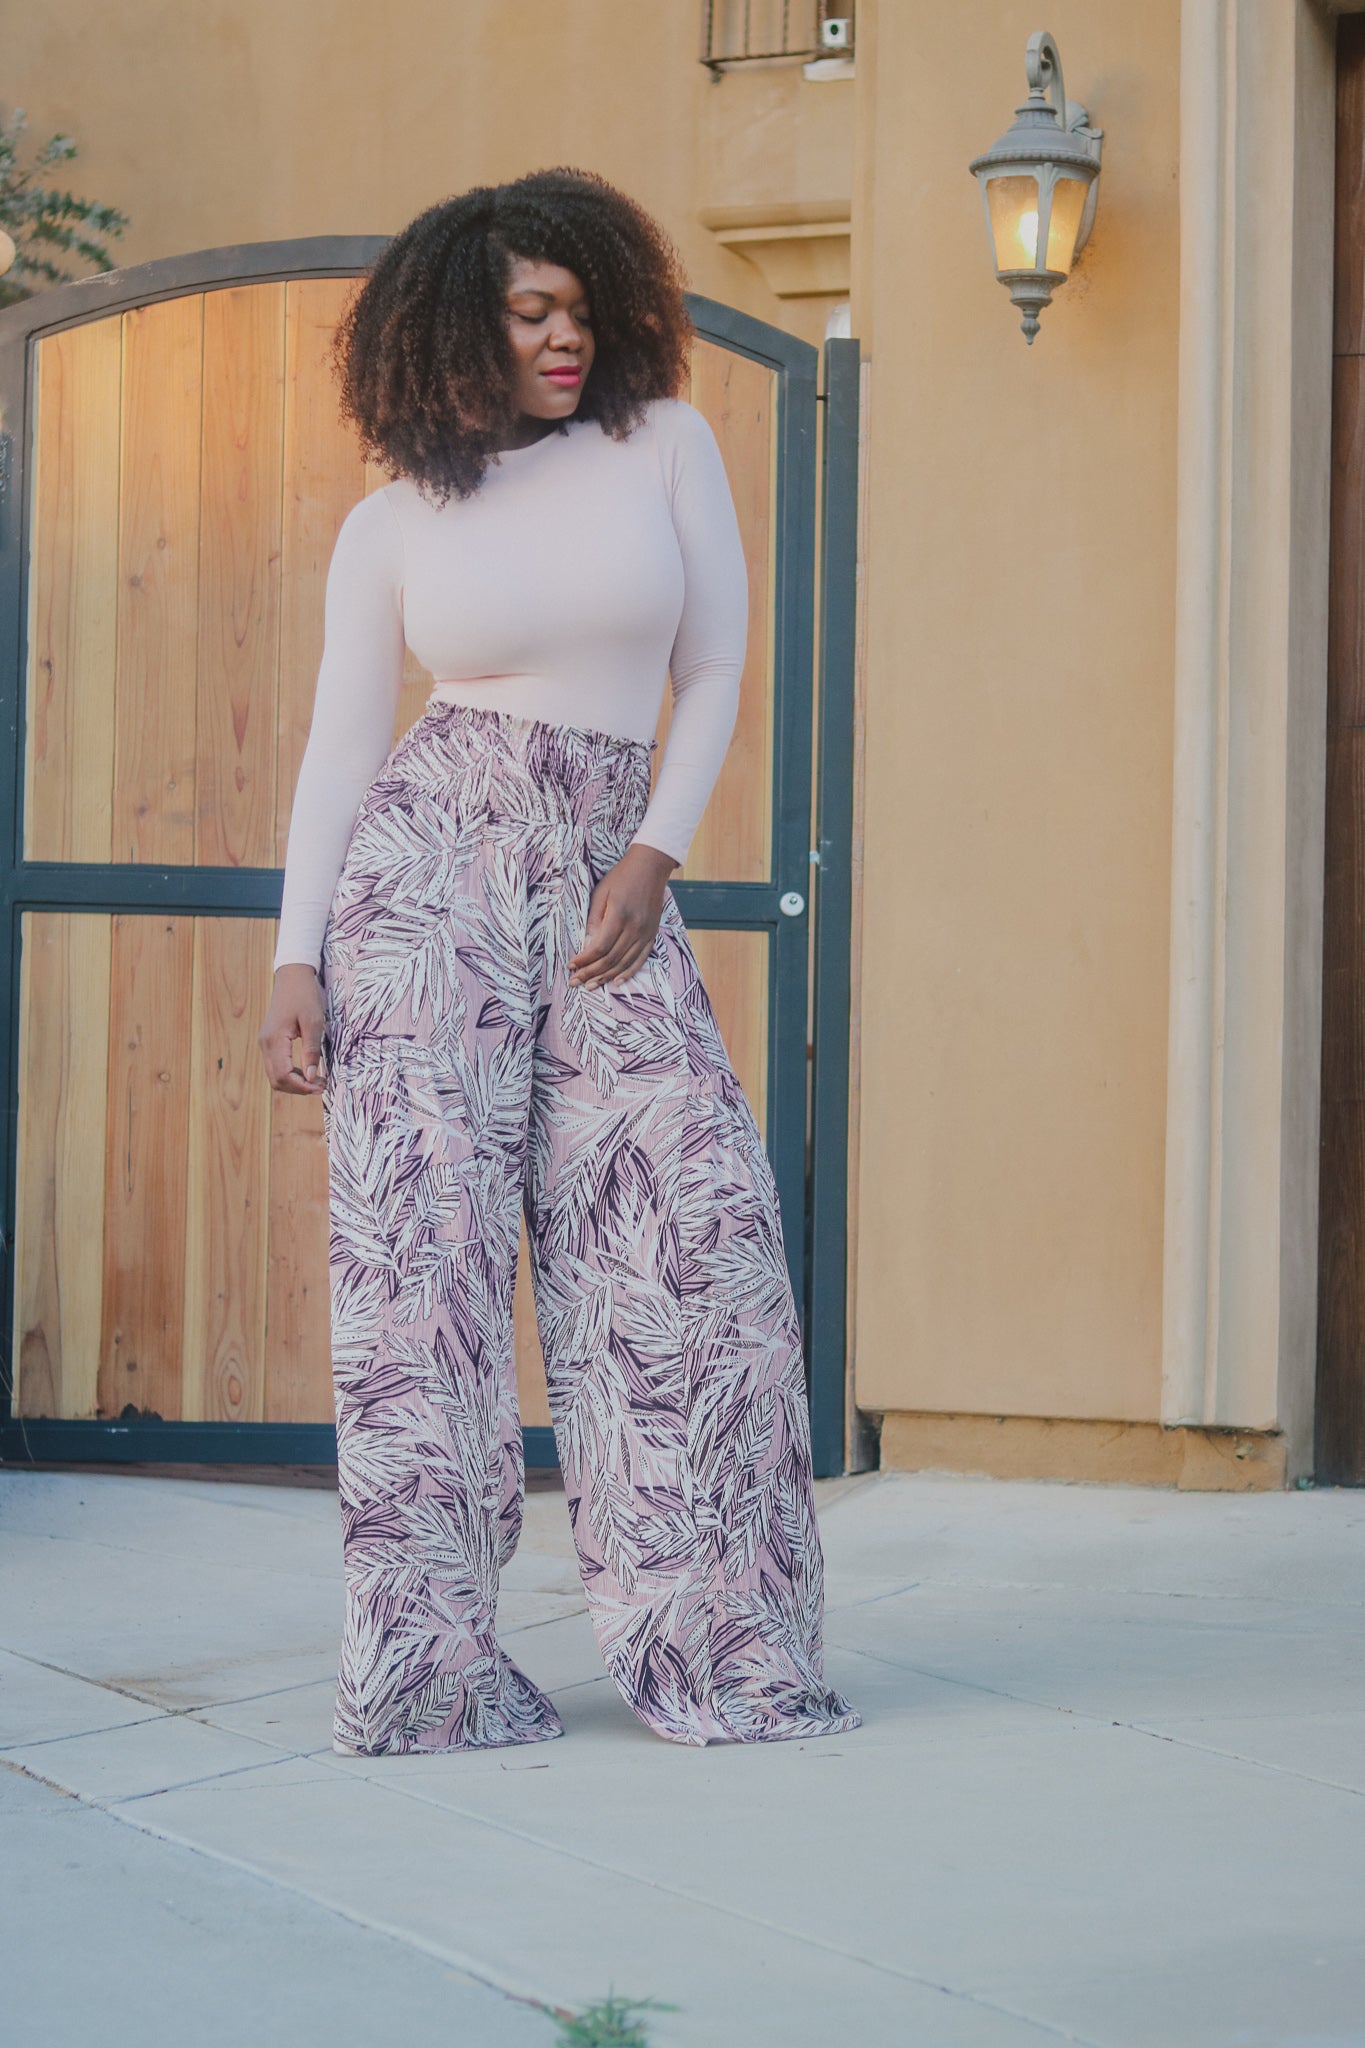 Five different ways to style a palazzo pants – Everyday fashion